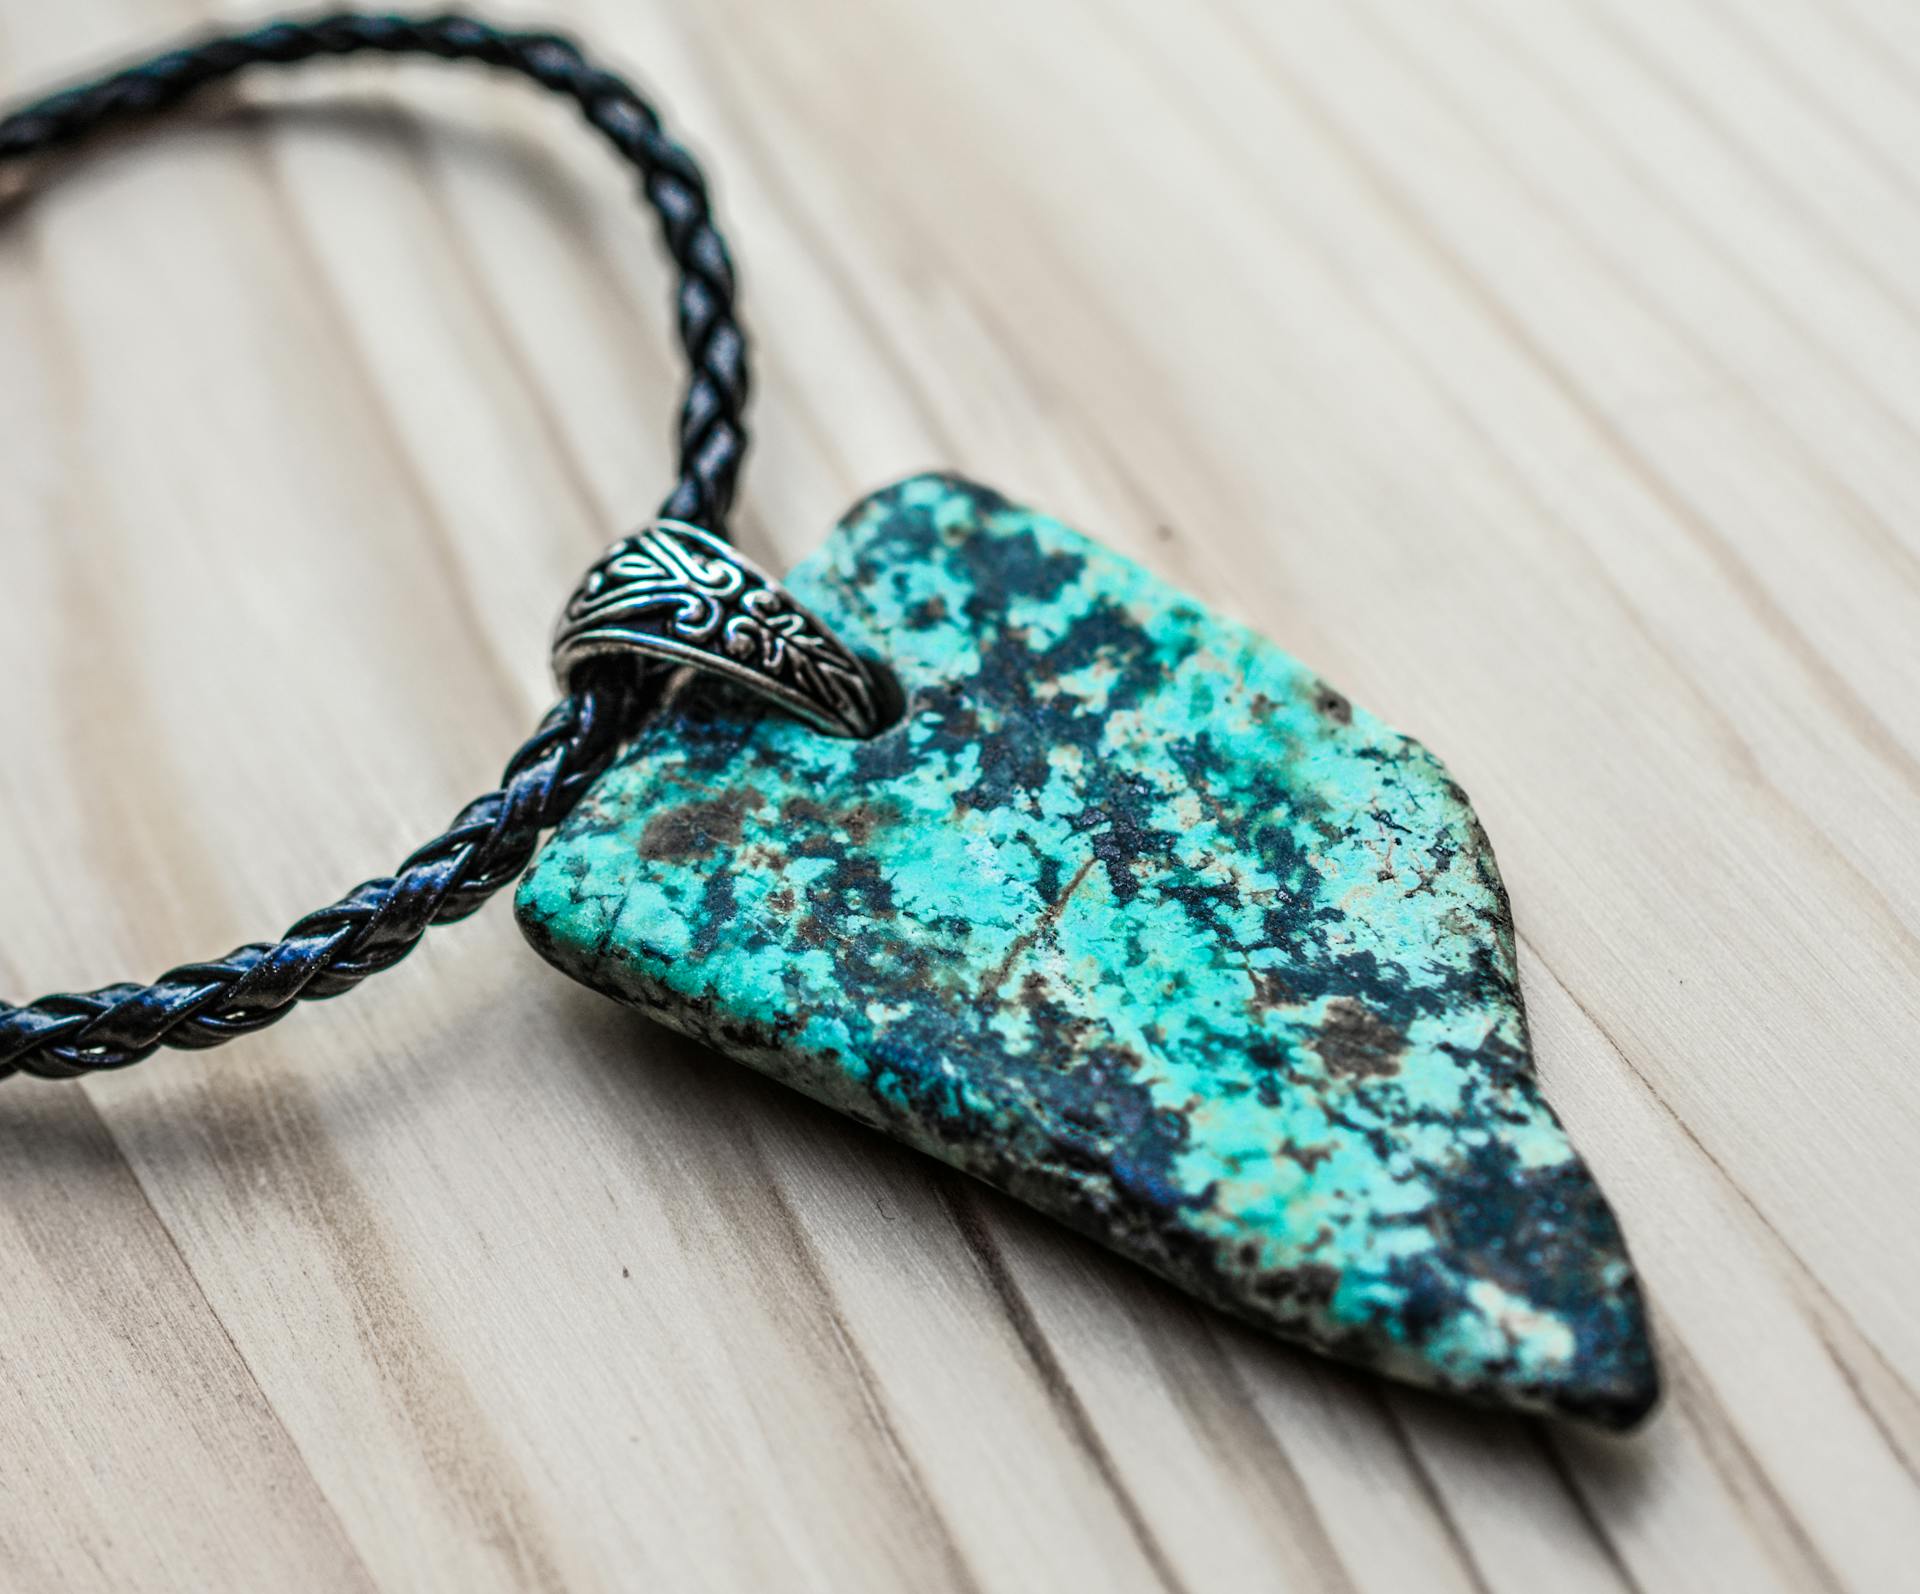 A gray and black stone pendant on a black necklace | Source: Pexels